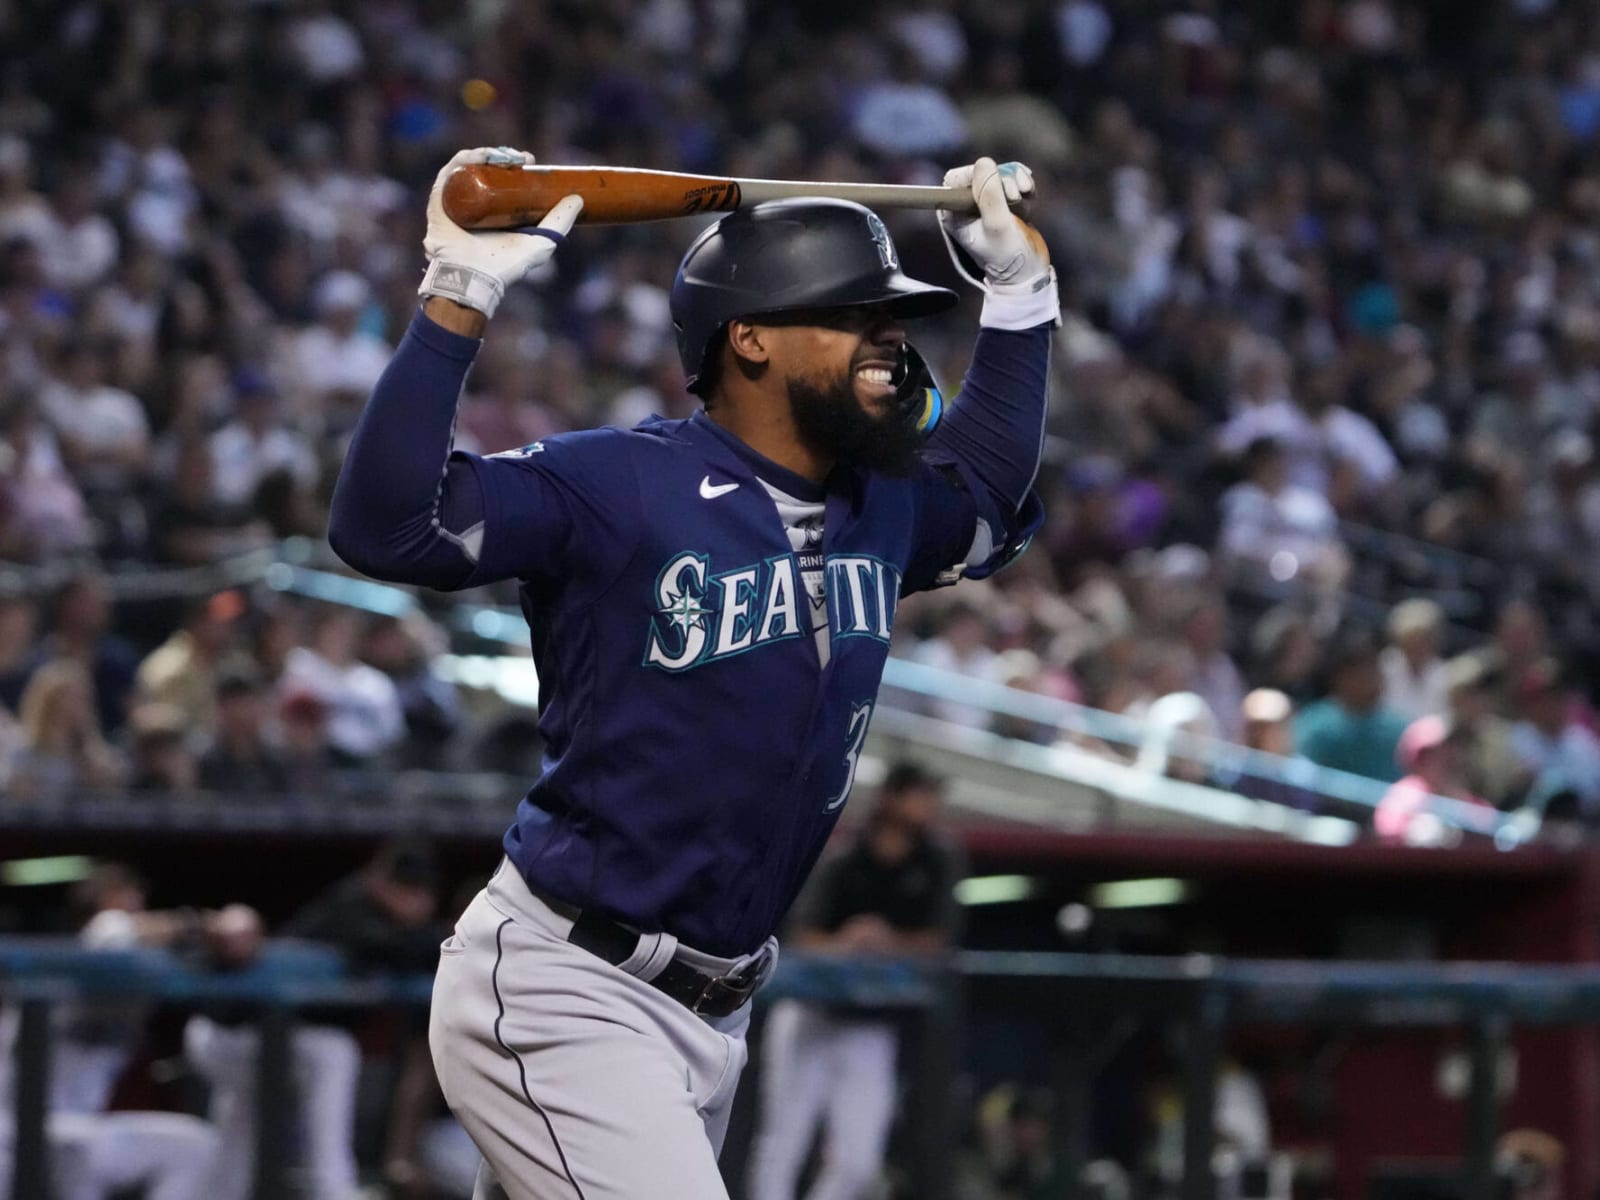 The Mariners Have Surged Into Contention